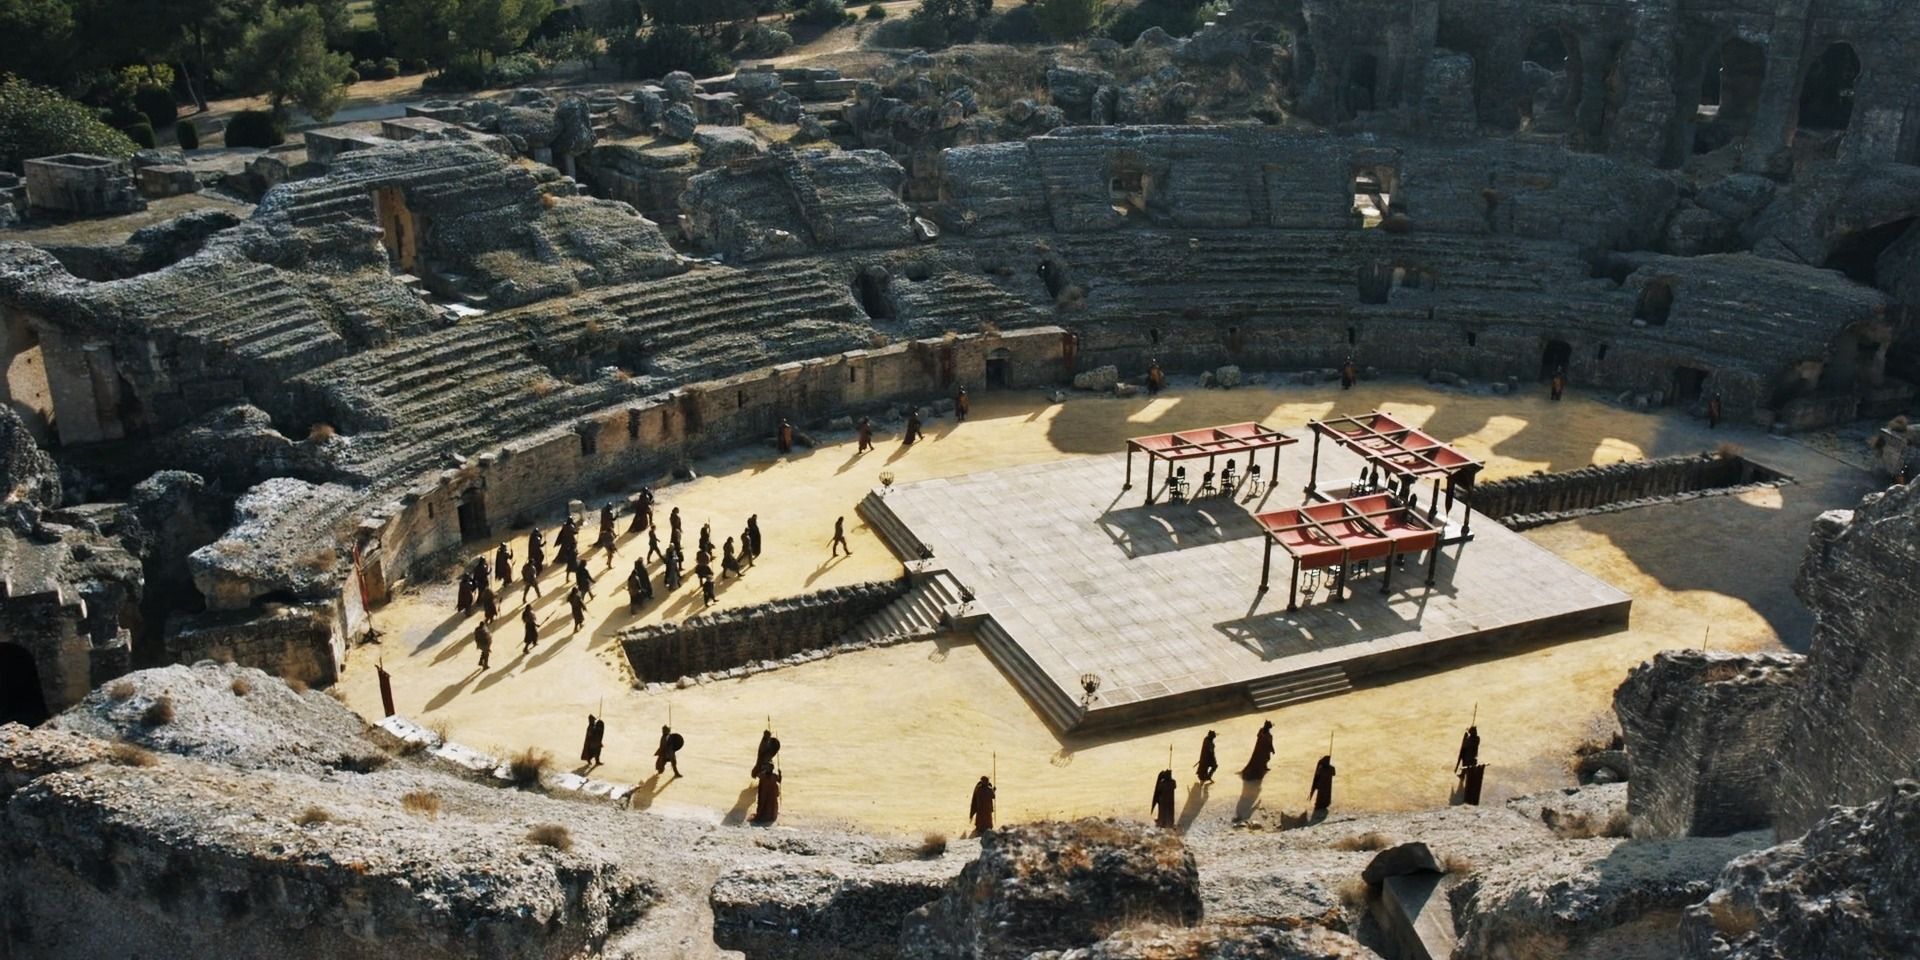 The Dragonpit summit in Gme of Thrones